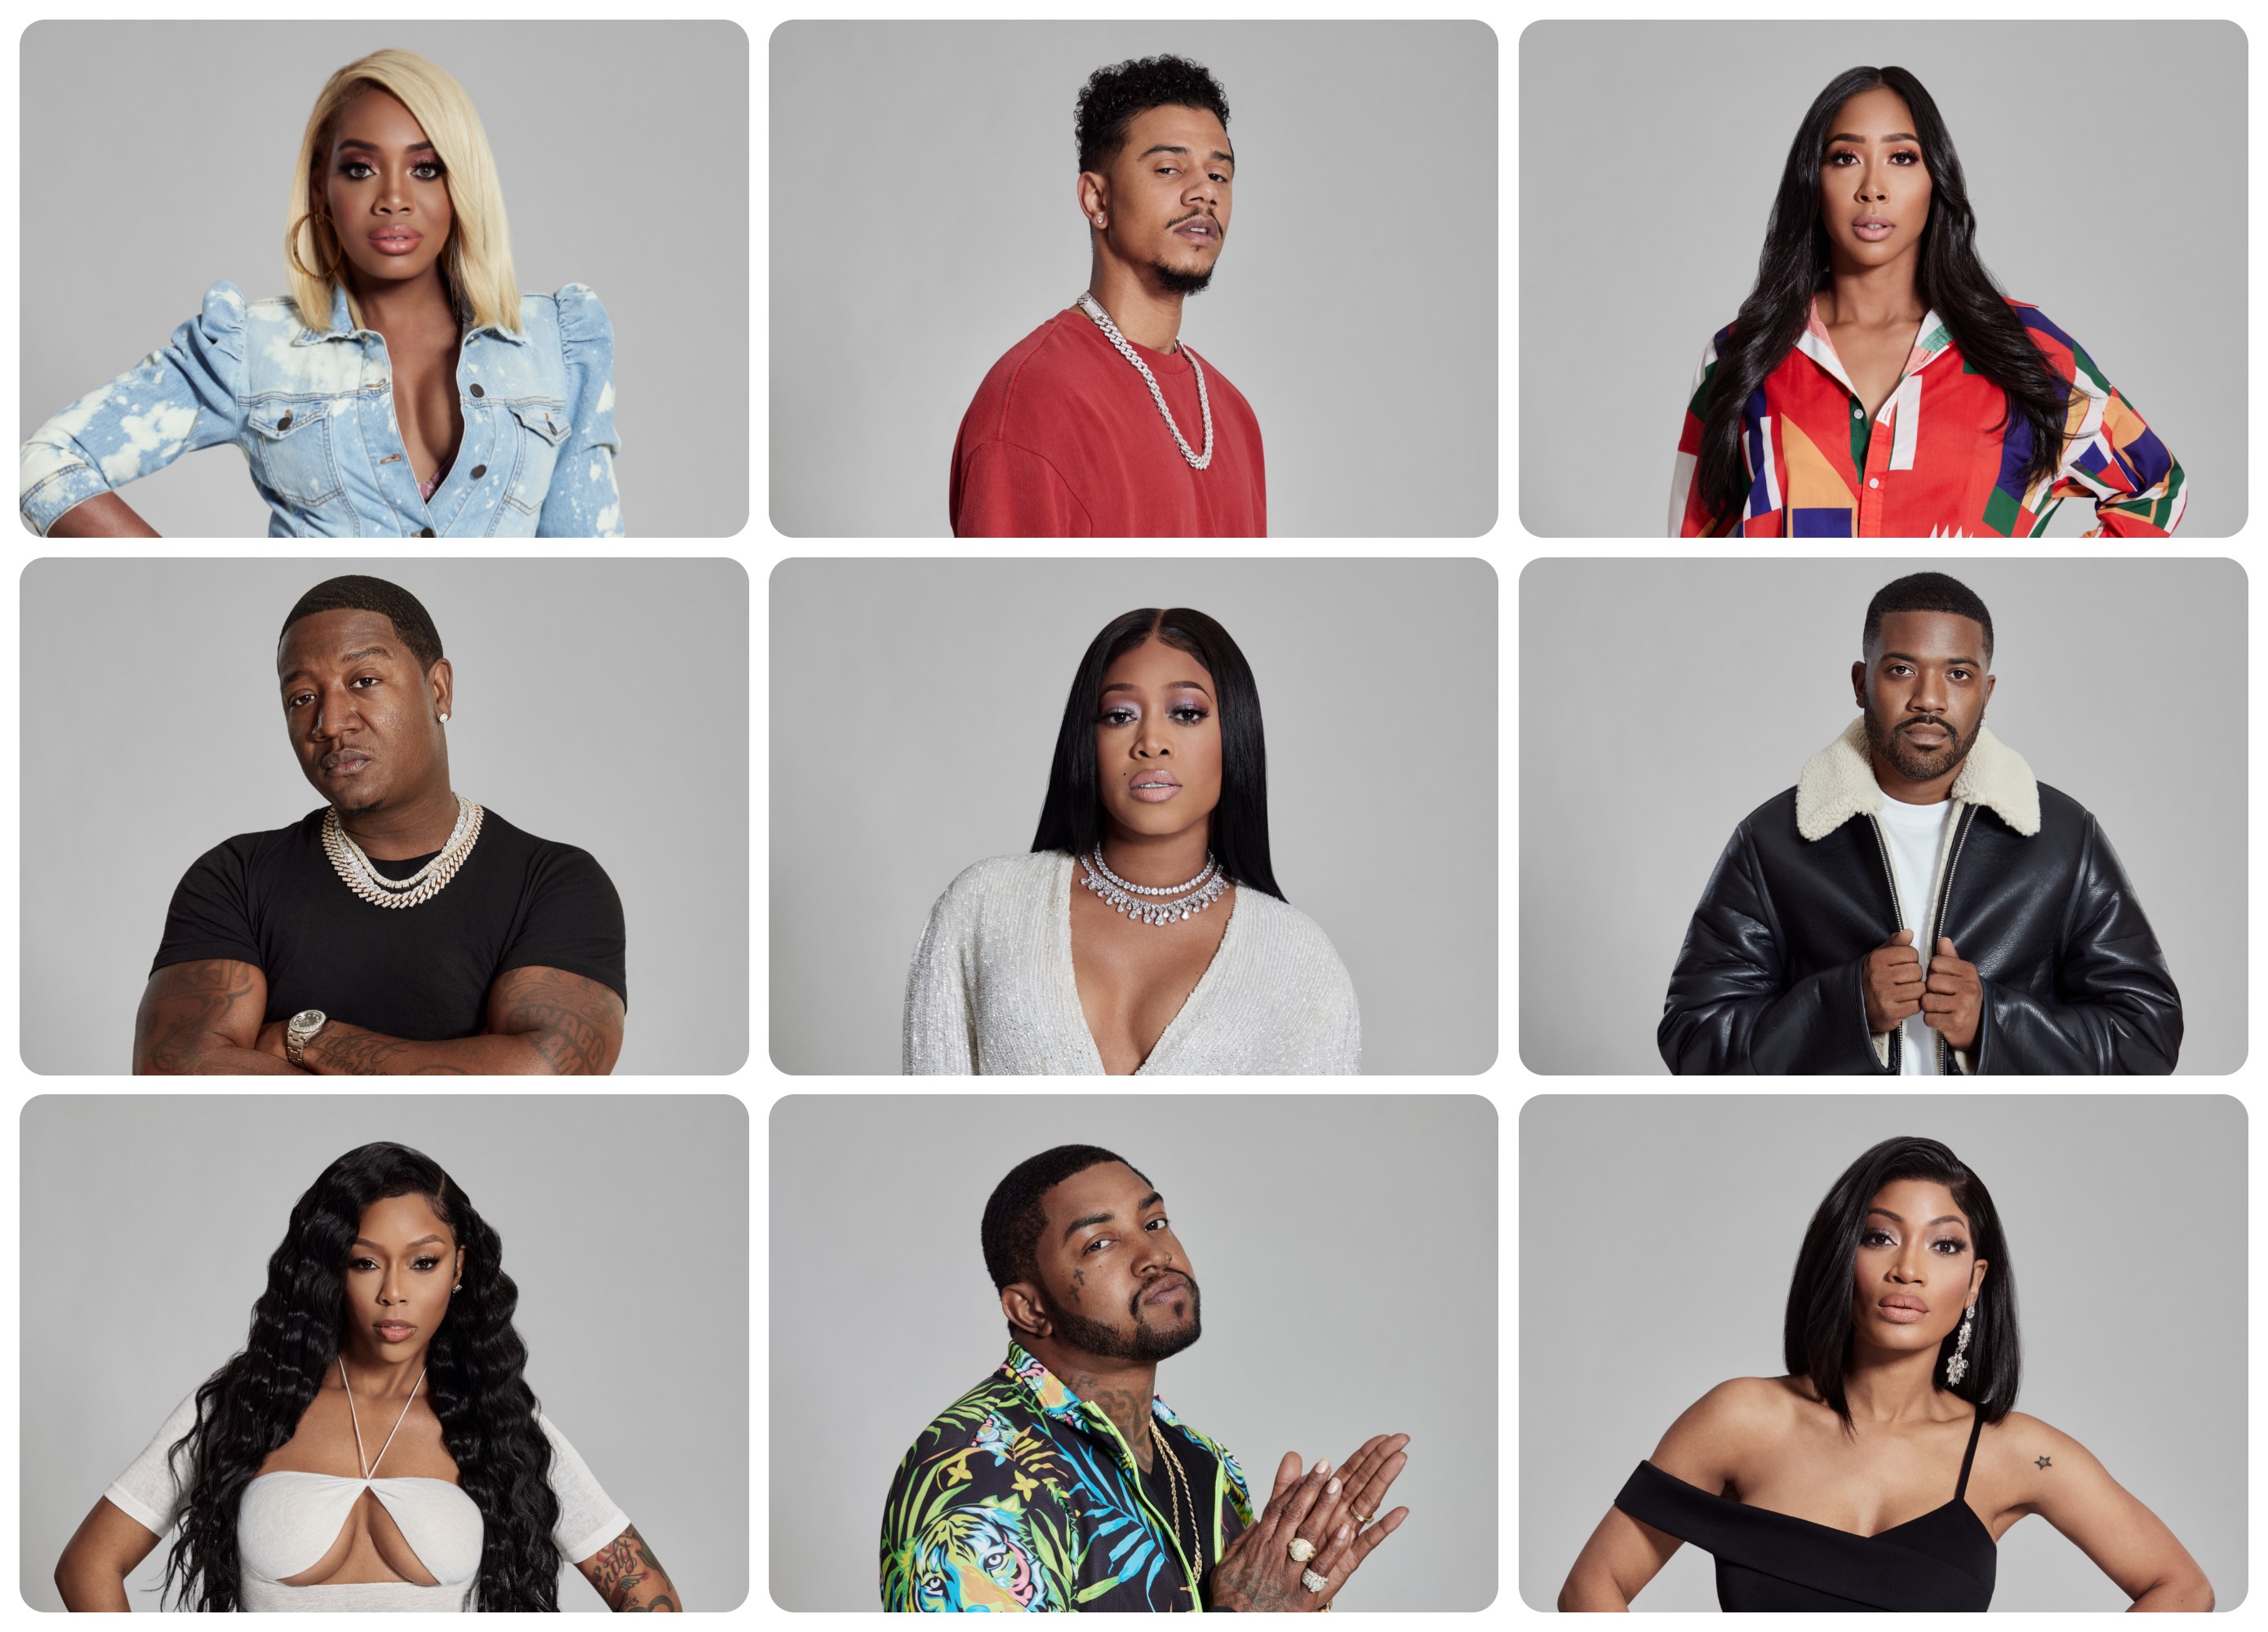 Key art for the cast of Family Reunion: Love & Hip Hop Edition